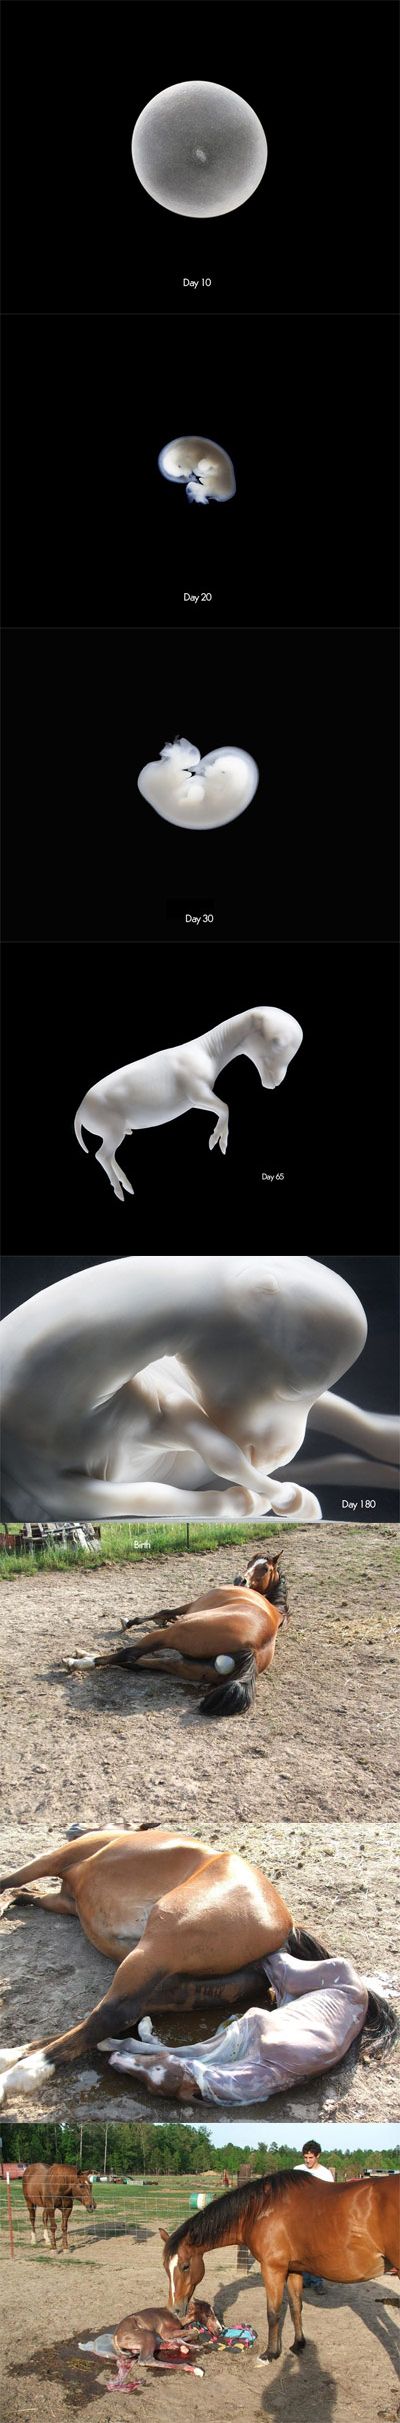 Sequence Images Of A Baby Horse Growing And Being Born